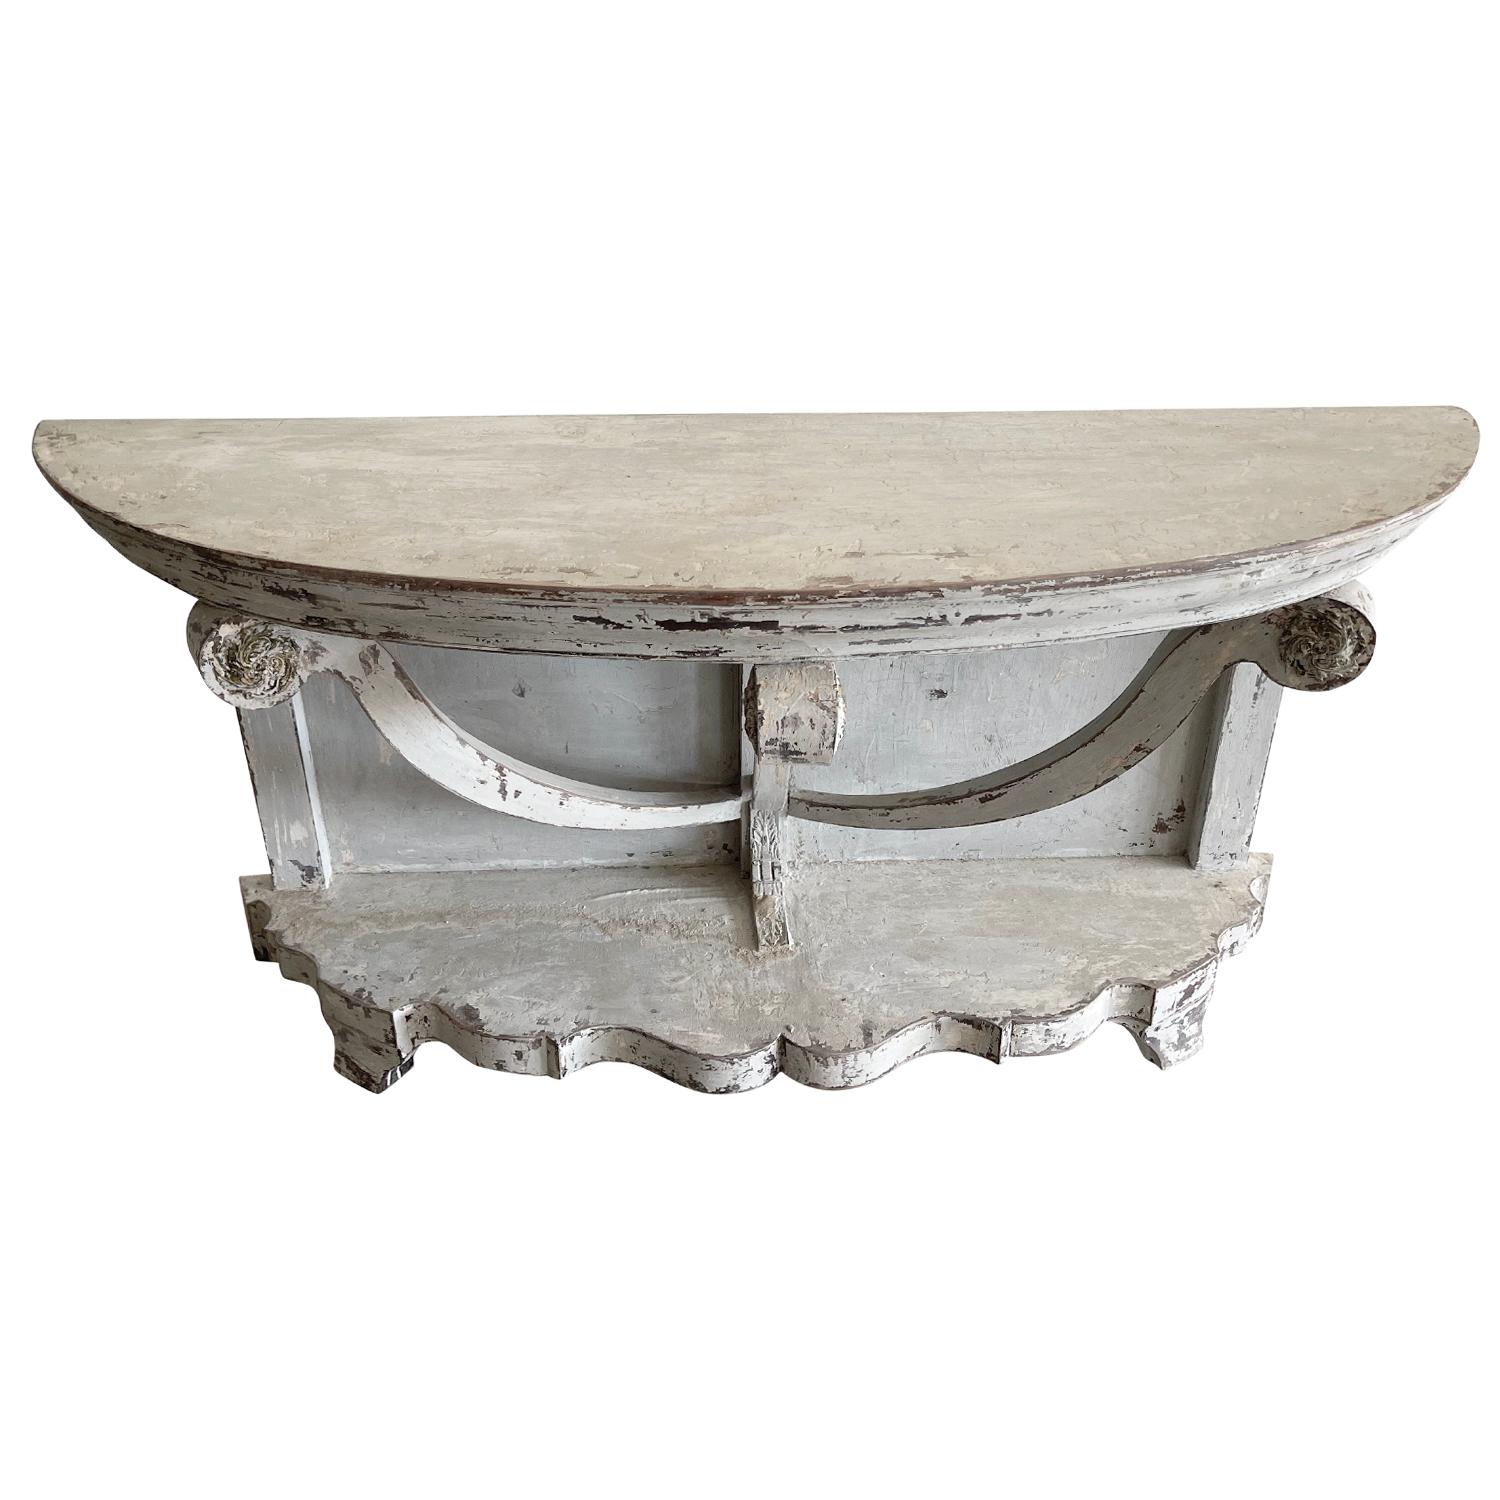 An antique 19th Century Provincial demi-lune console table with crown molding is decorated and supported by large swags, in good condition. The wall mount console is resting on a heavy bottom shelf. Hand crafted in painted Oakwood with the original